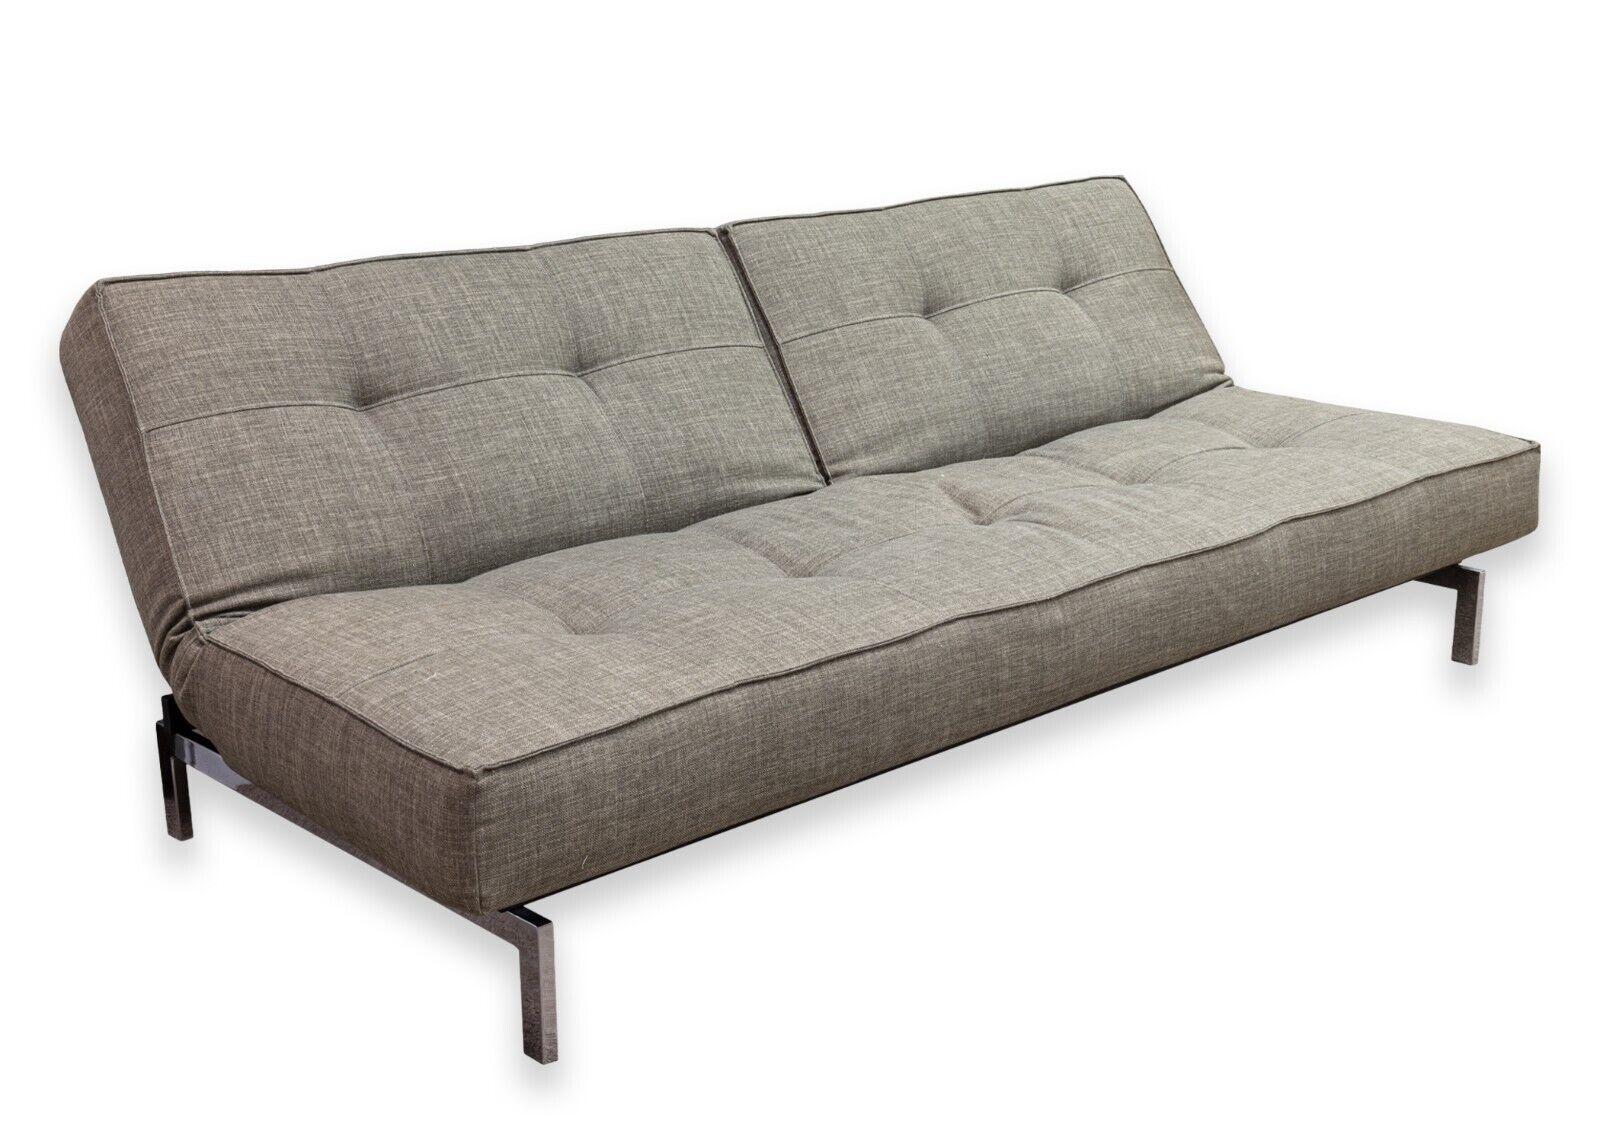 An Innovation Living Dublexo stainless steel sofa bed, made in Denmark. A gorgeous contemporary modern lounge sofa from designer Per Weiss in 2011, lead designer at Innovation Living. This piece features an adjustable back with 3 different positions